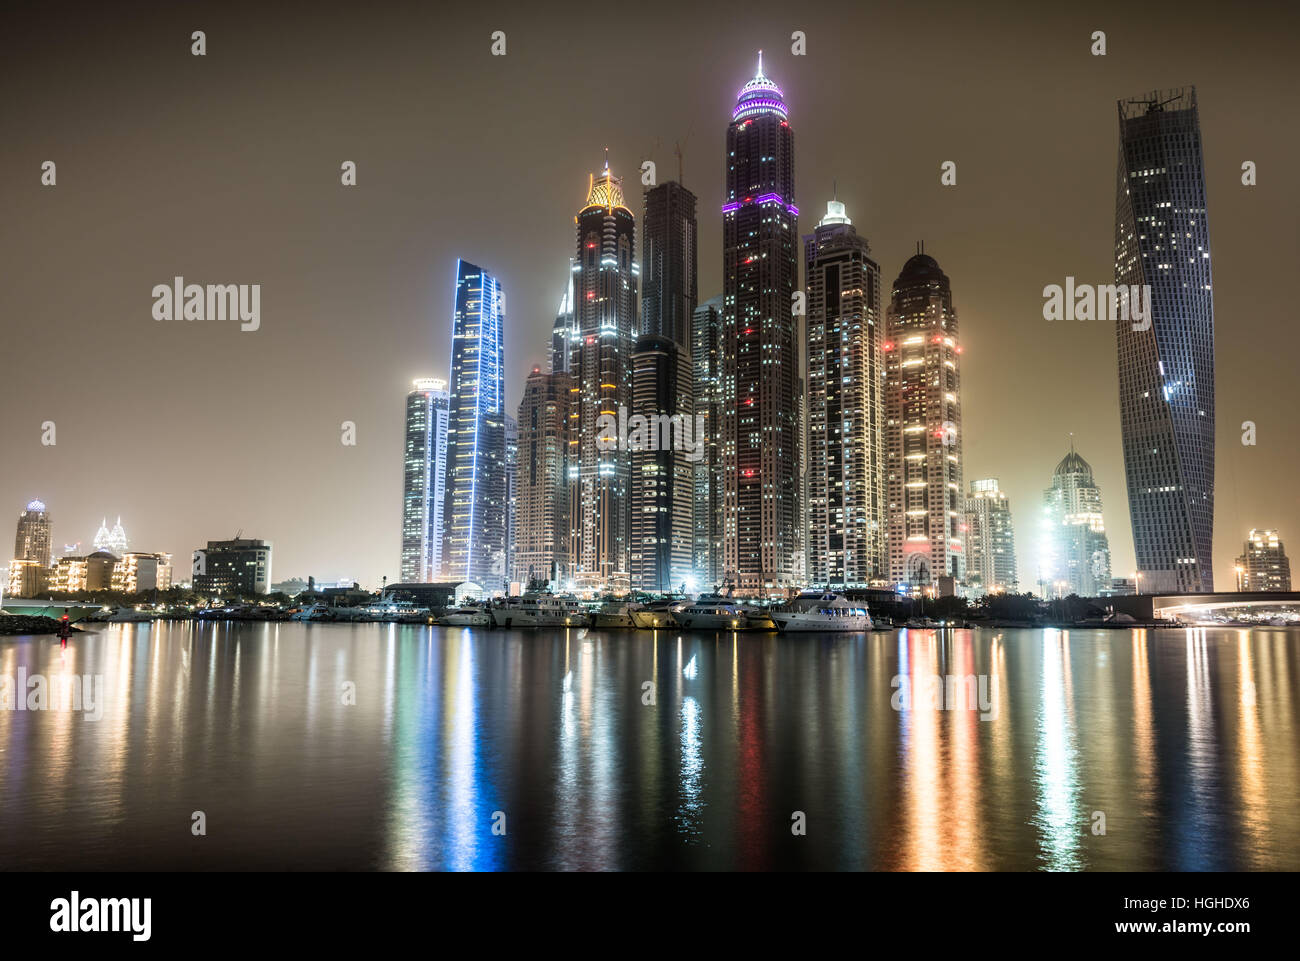 Night view of Dubai Marina with reflections in the harbour Stock Photo